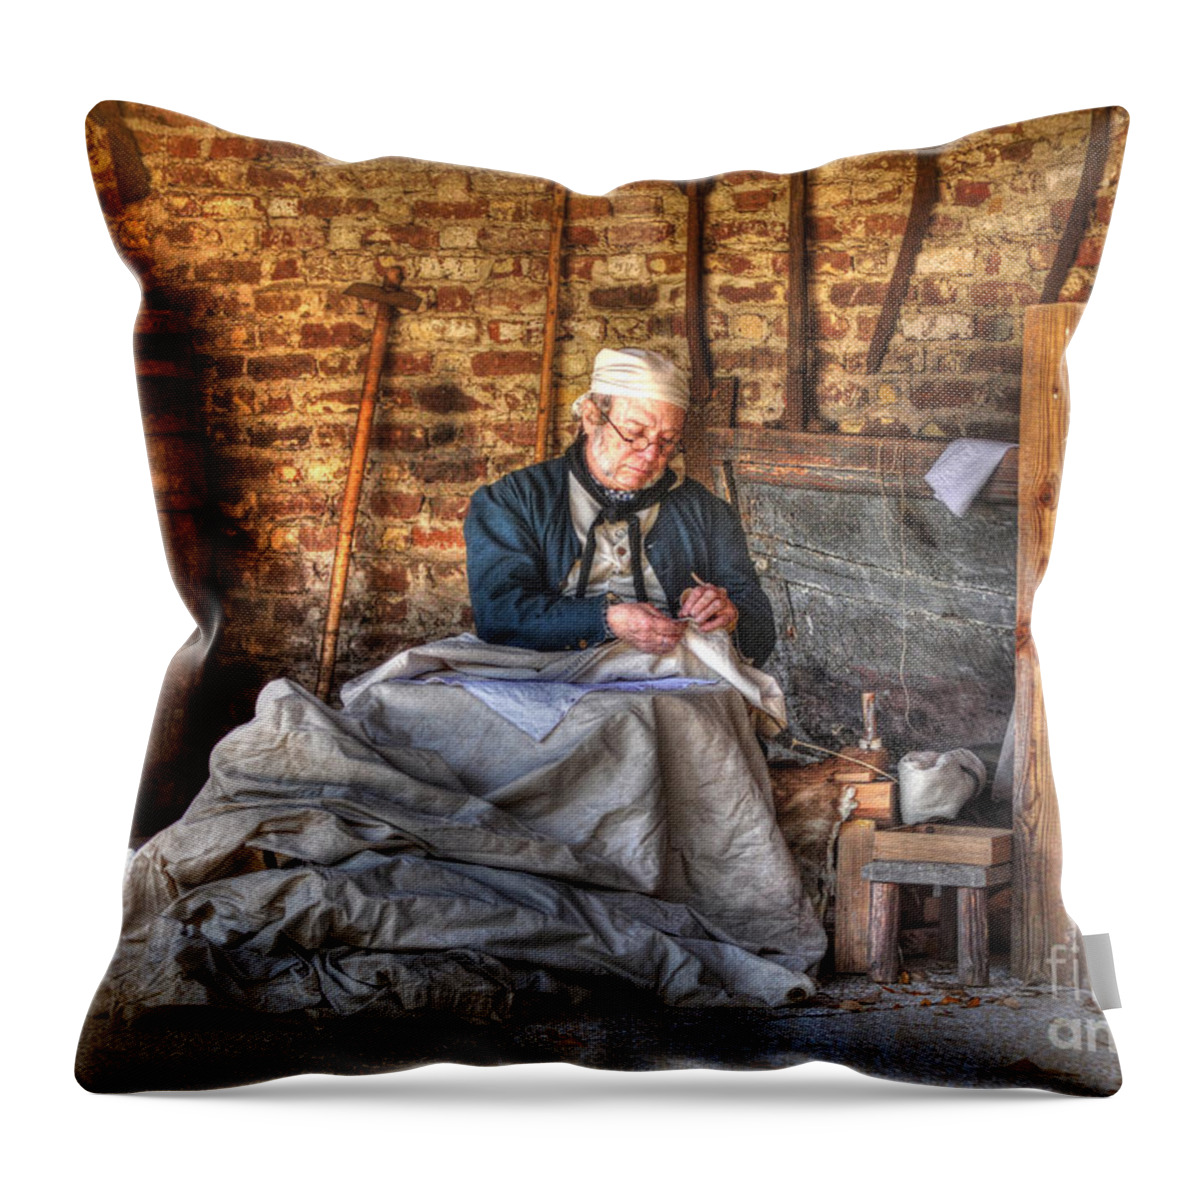 Historic Throw Pillow featuring the photograph A Stitch In Time by Kathy Baccari